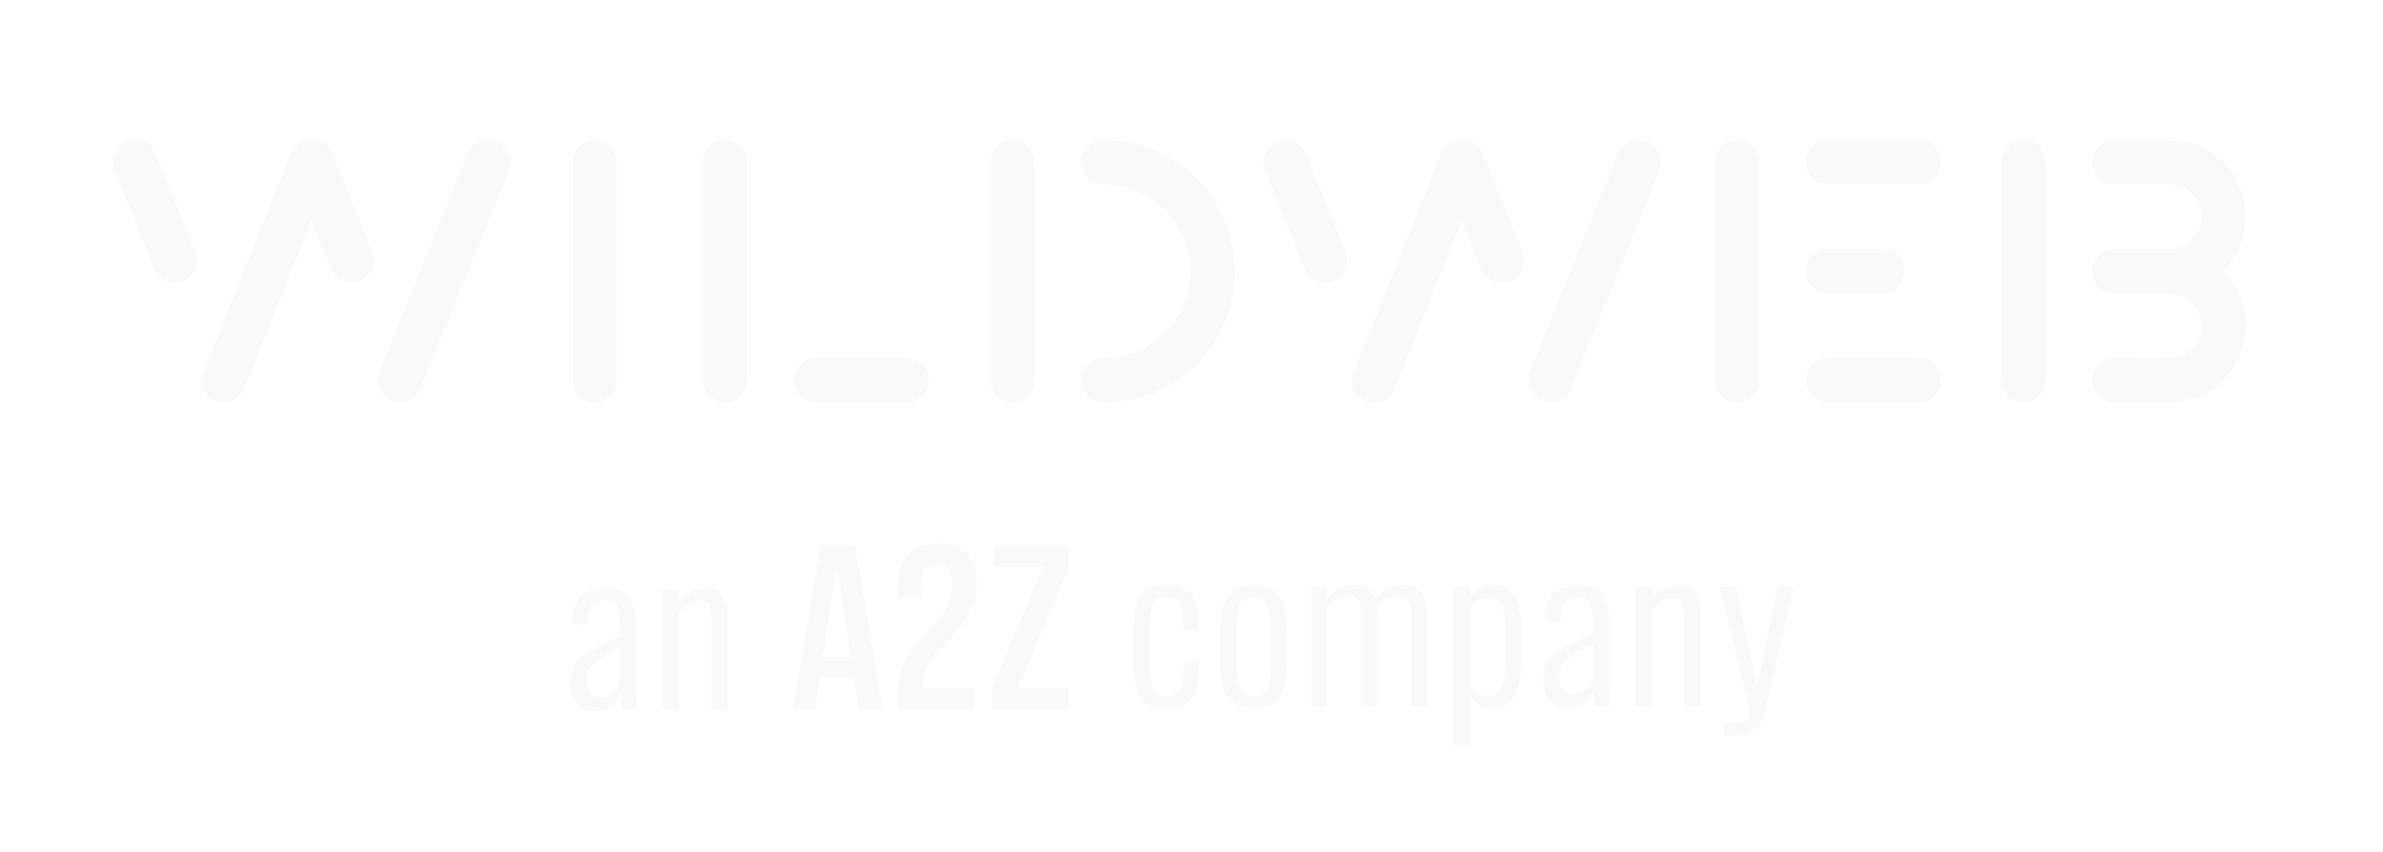 wildweb - an a2z company, lead to the homepage